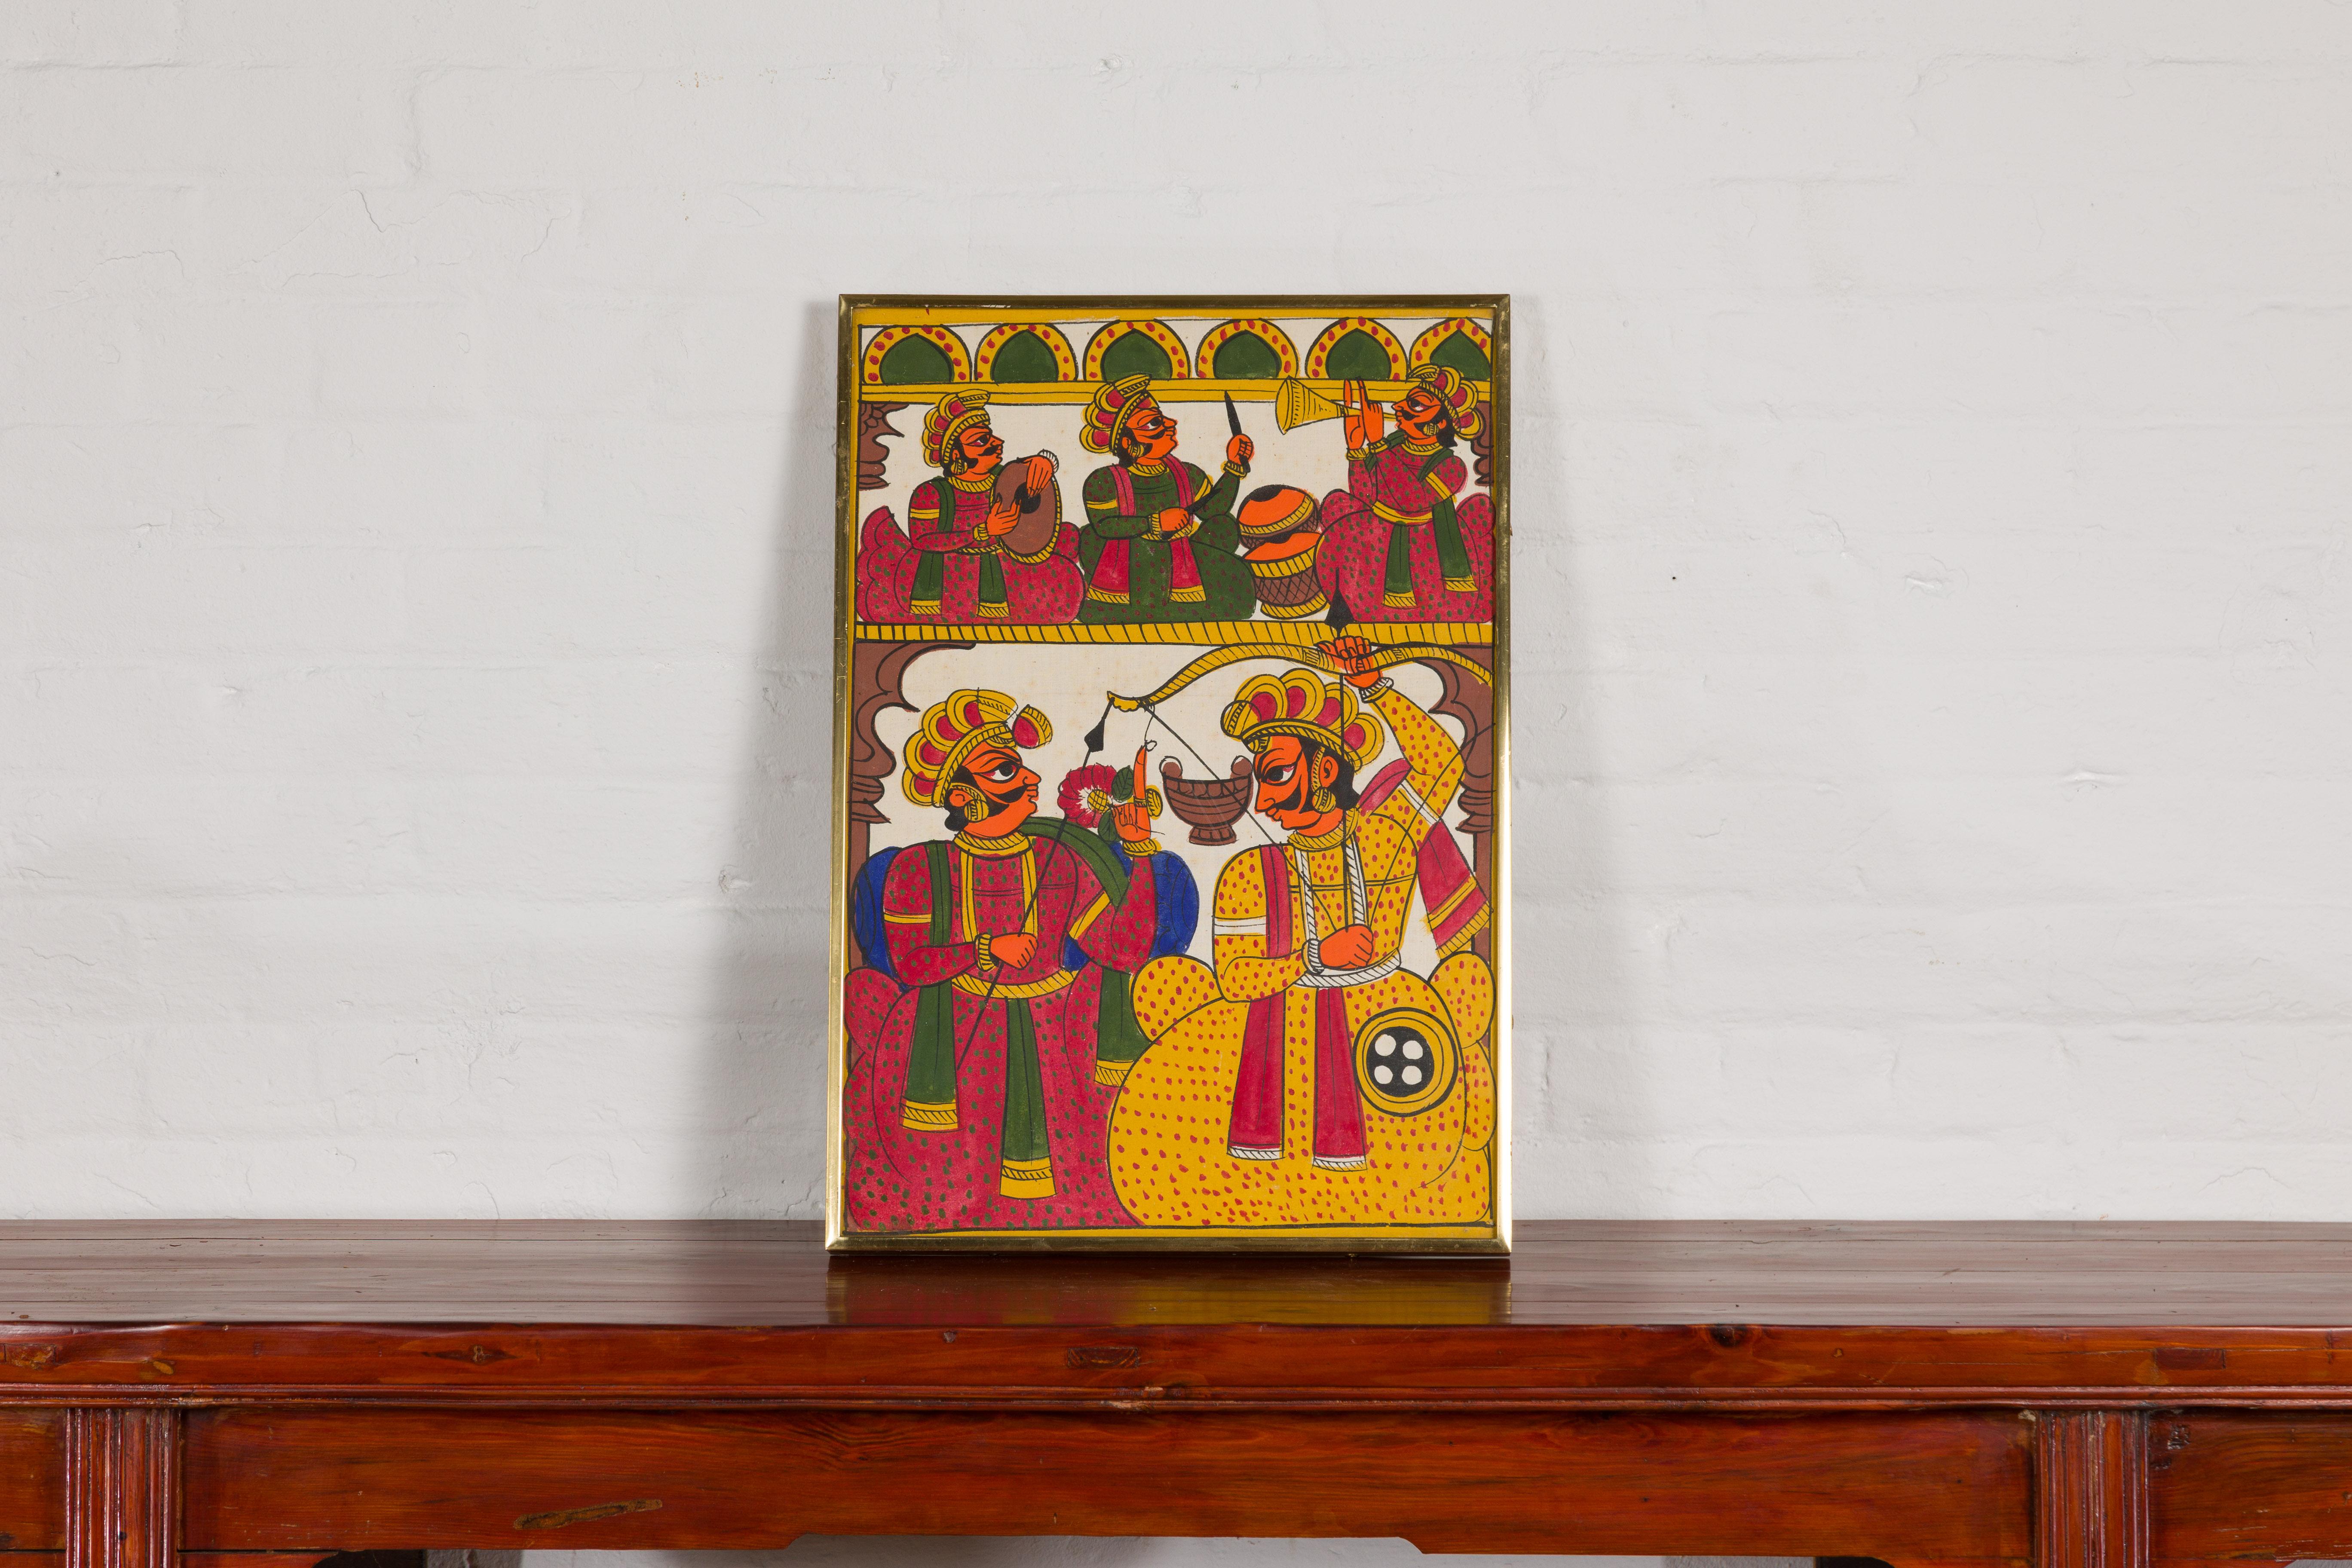 An antique Indian hand-painted folk art painting depicting musicians and archers in a brass custom frame. Step into a vibrant world of rhythm and archery with this antique Indian hand-painted folk art painting. Beautifully rendered, this artwork is